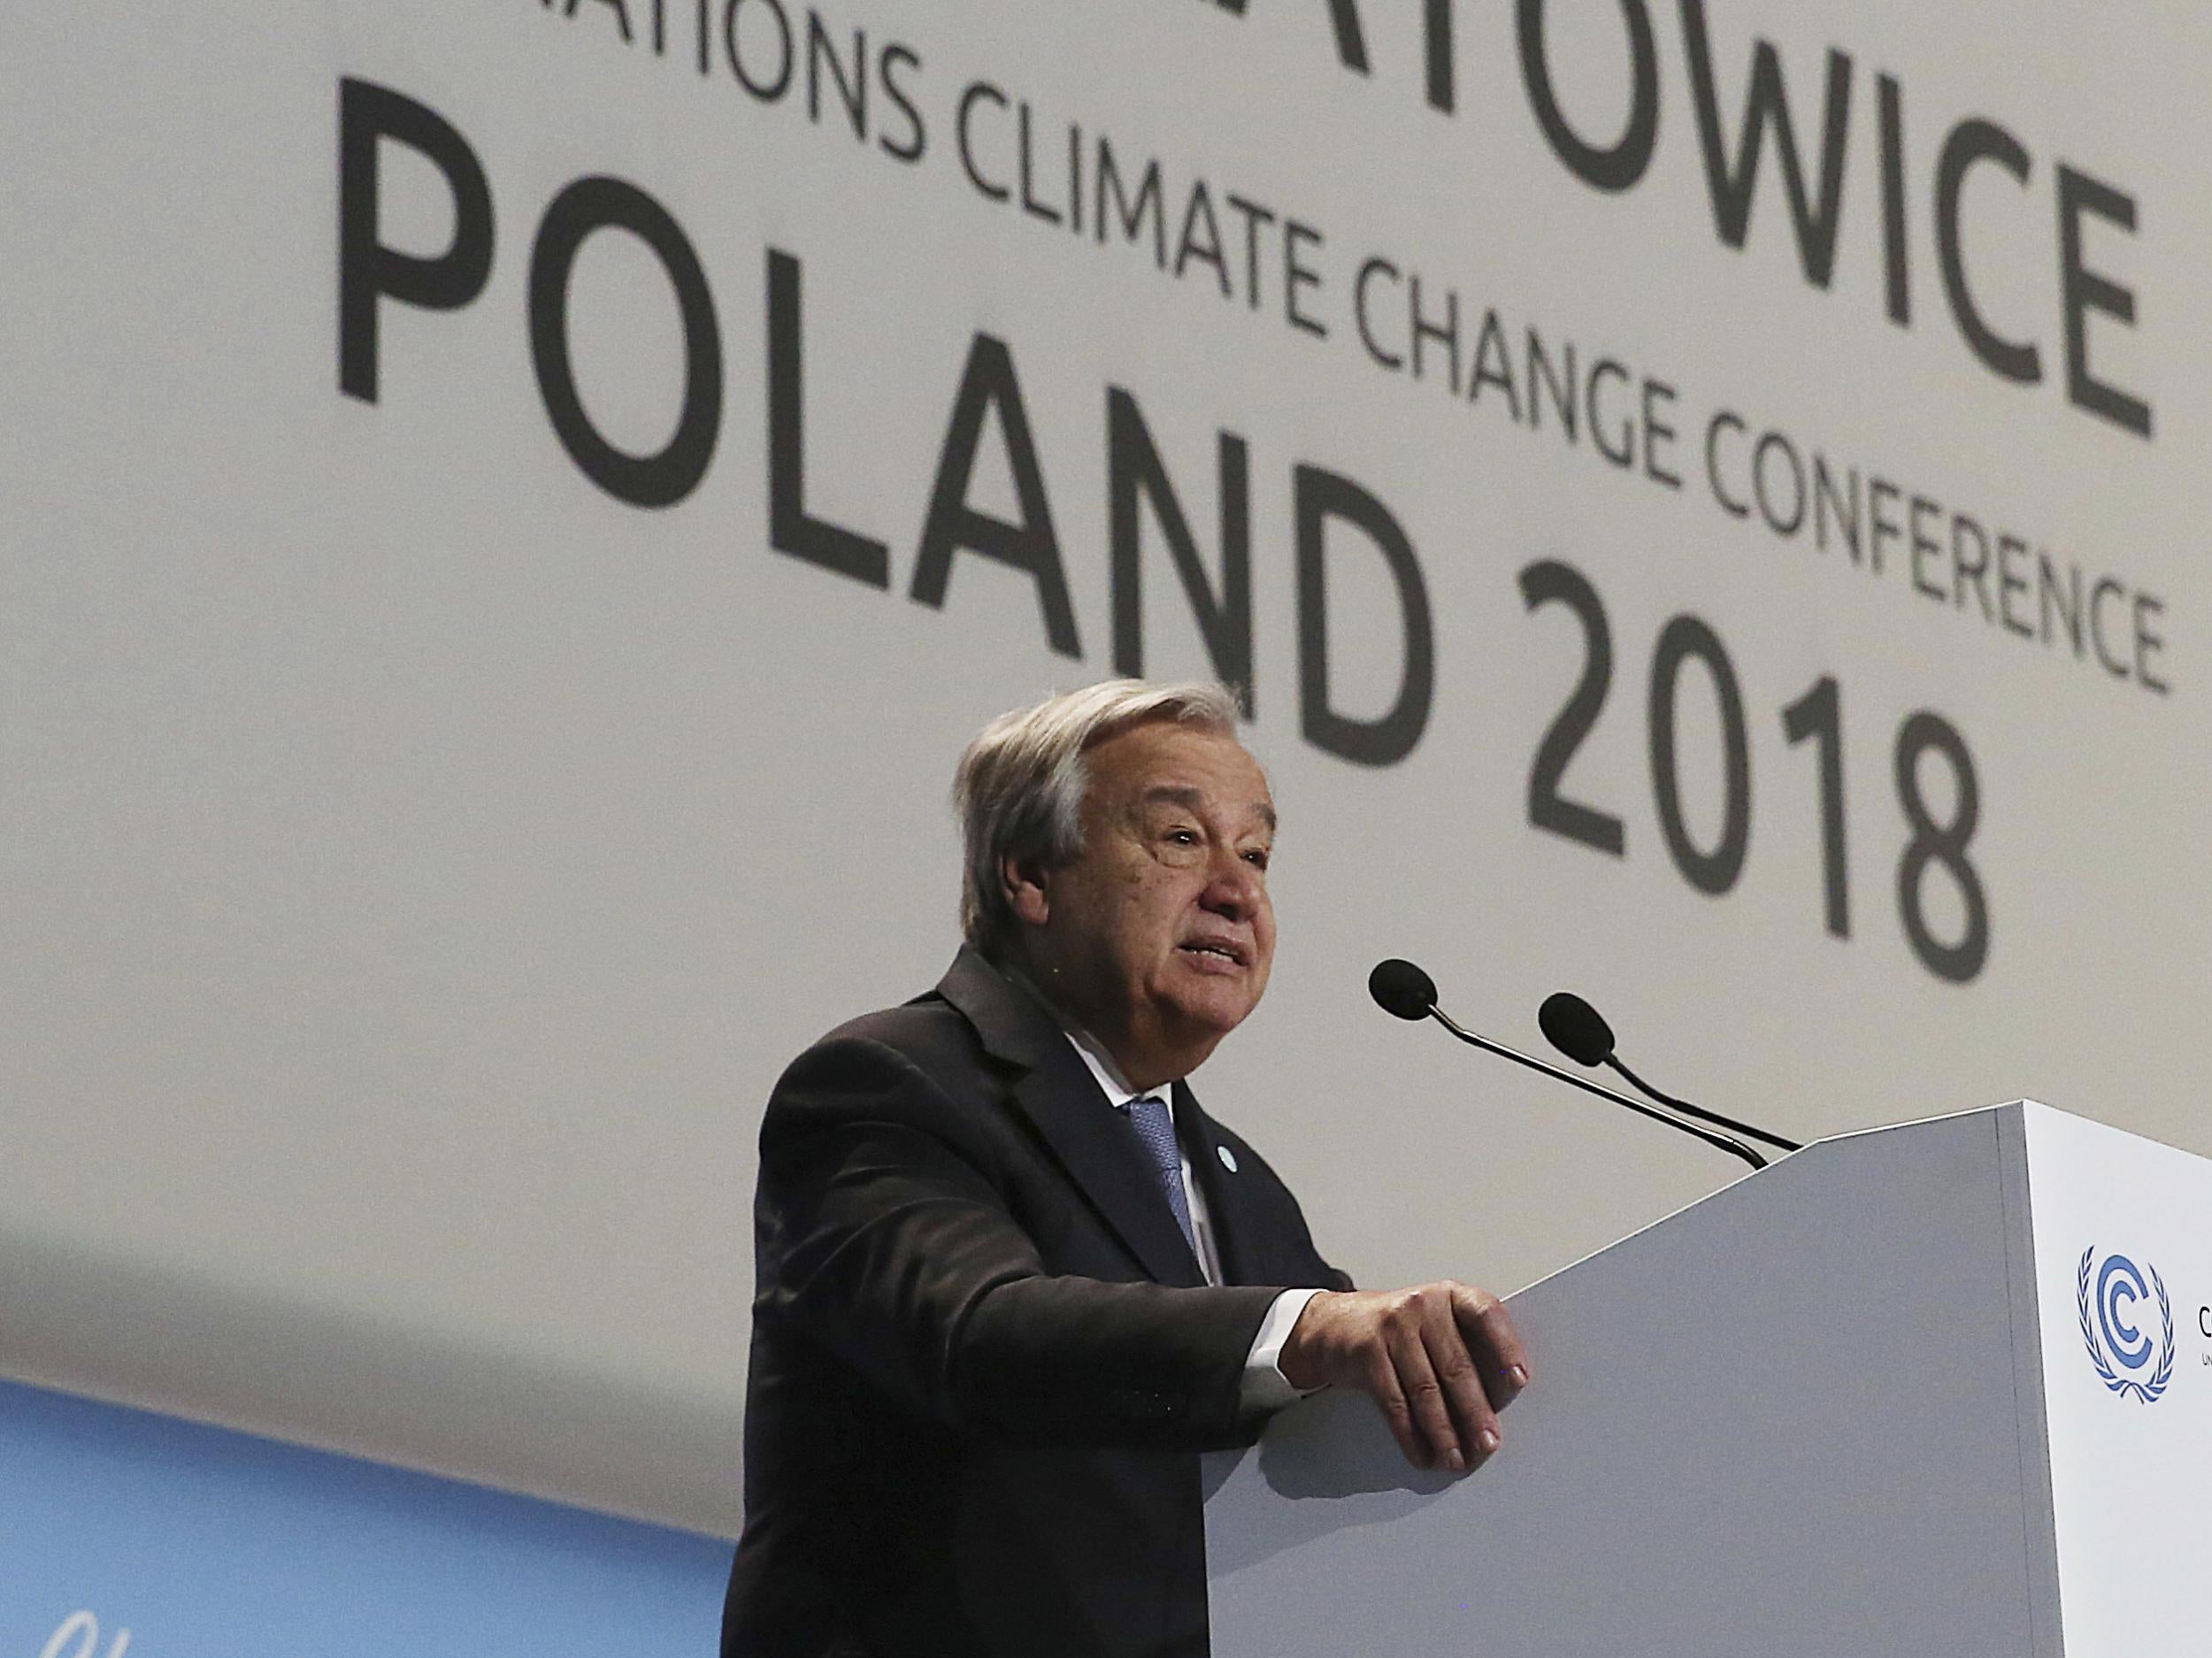 UN secretary general Antonio Guterres has returned to the COP24 conference after speaking at the opening event the previous week